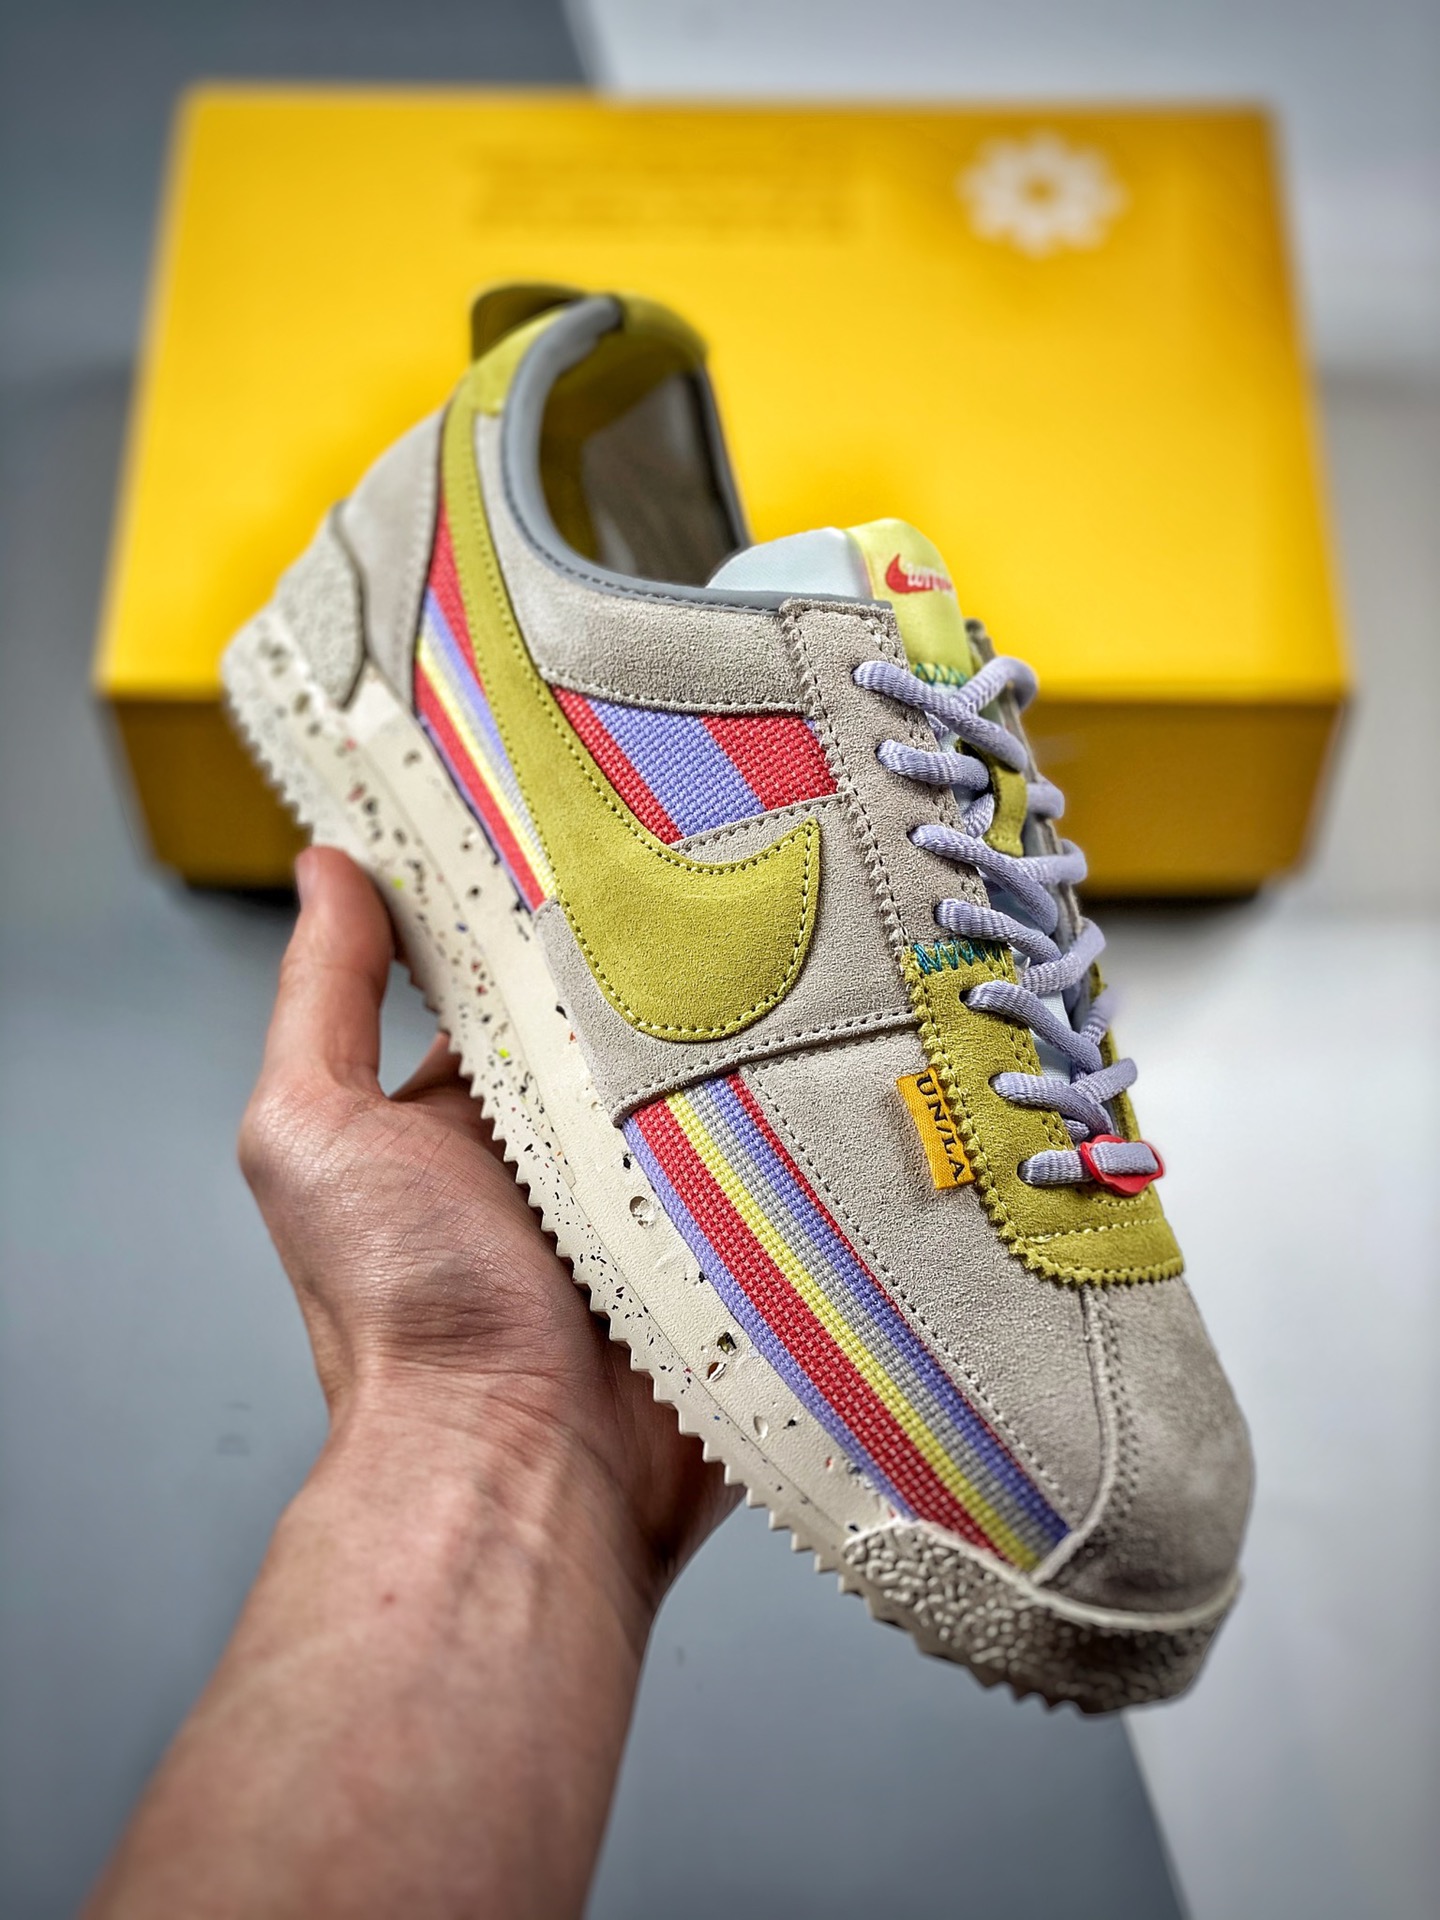 Union x Nike Cortez Yellow Purple Red DR1413-100 Shoes